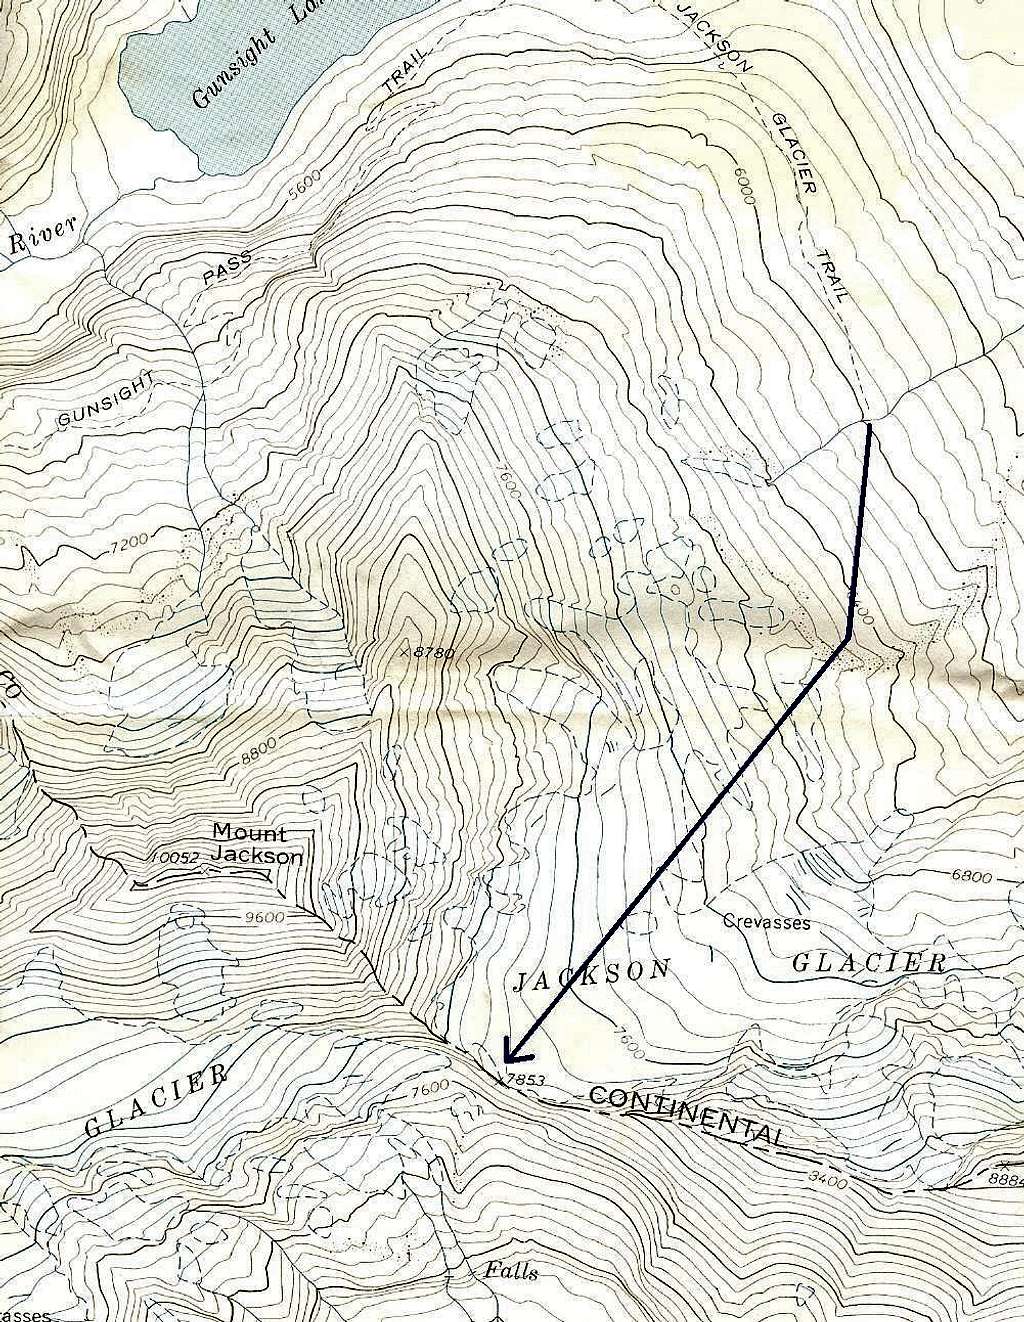 Route from Gunsight Lake